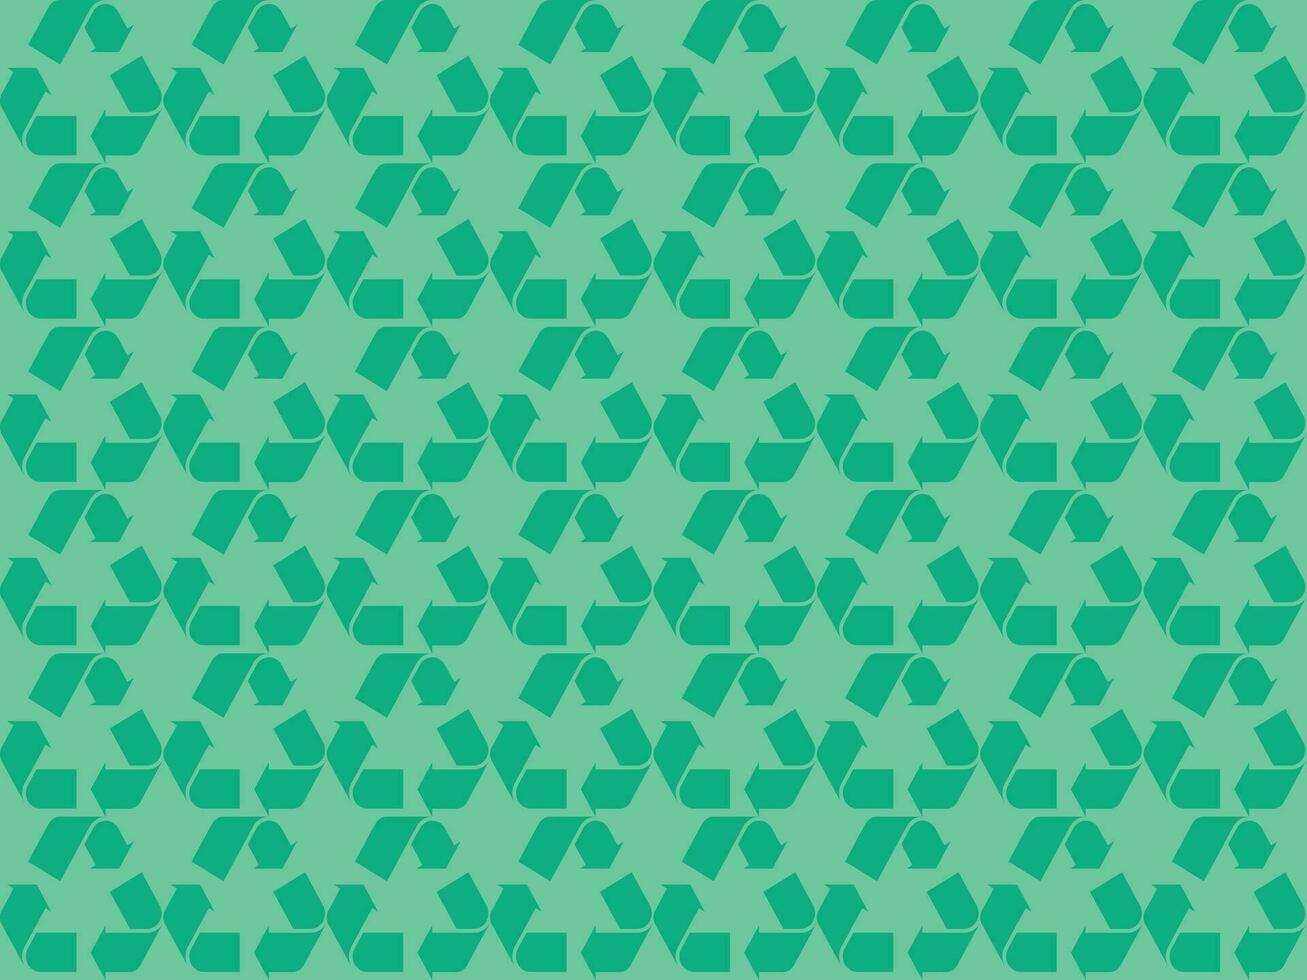 Vector illustration in green with the symbol of recycling